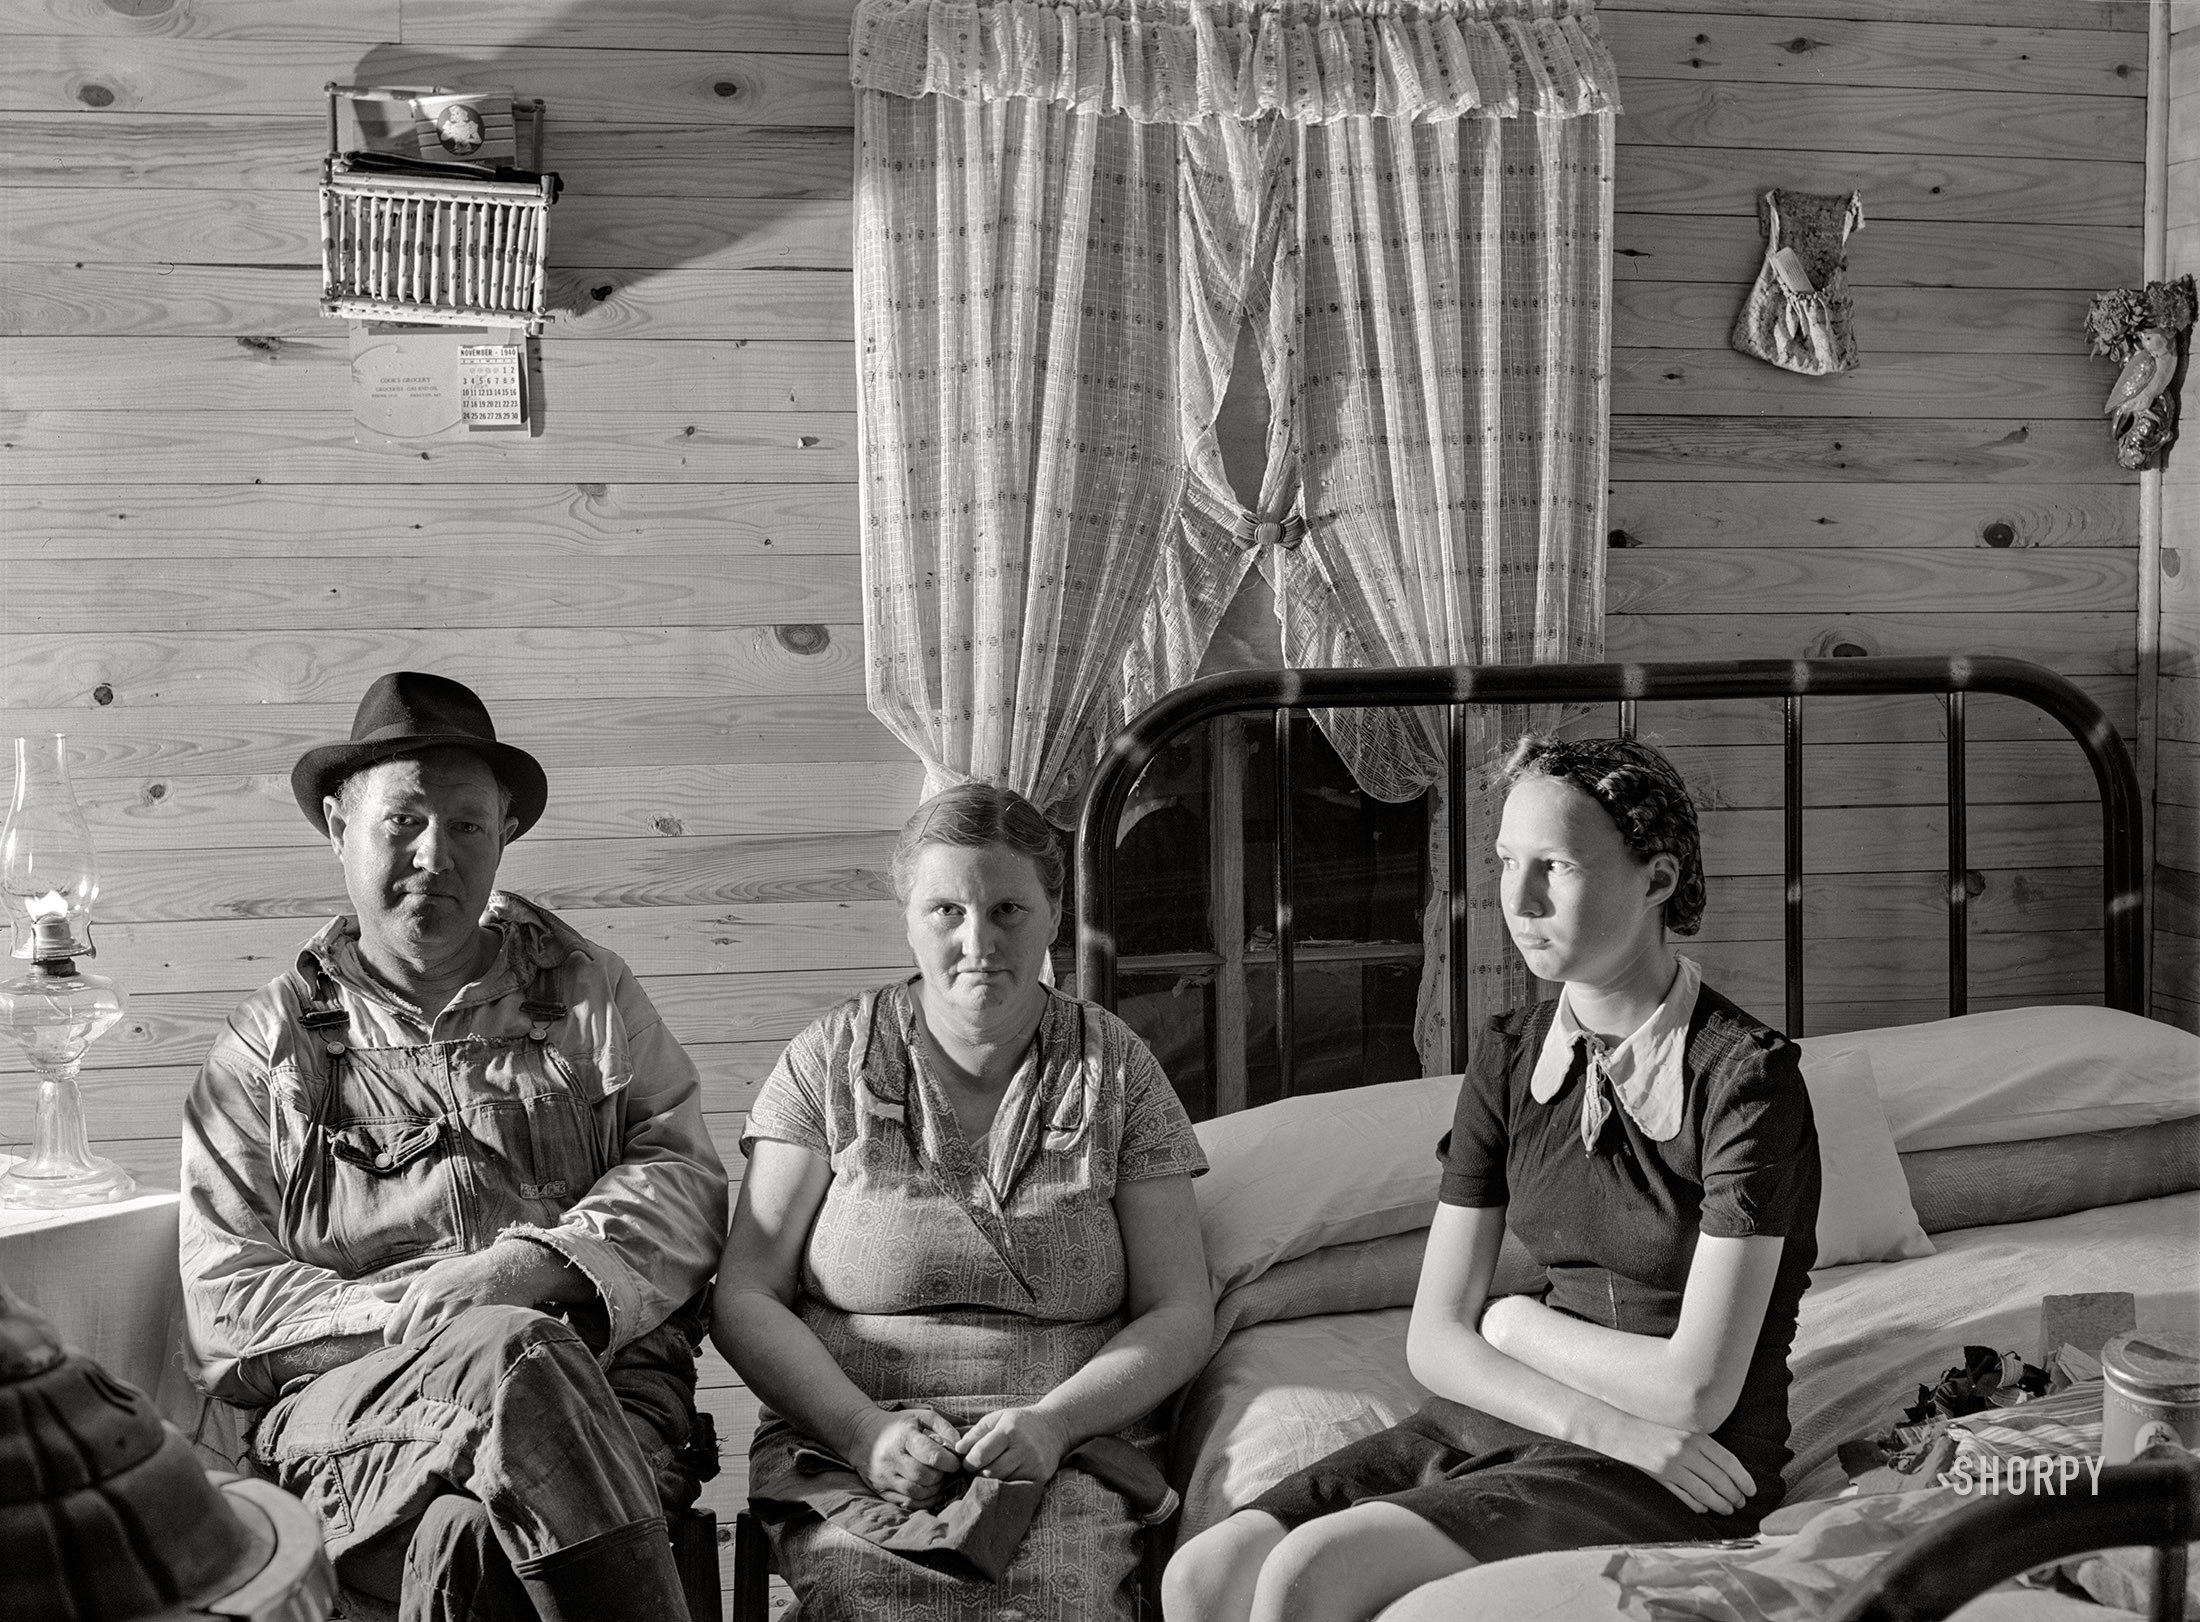 November 1940. "Agricultural day laborer, wife and daughter in new home built by the FSA. Delmo labor homes project, New Madrid County, Missouri." Medium format acetate negative by John Vachon for the Farm Security Administration. View full size.